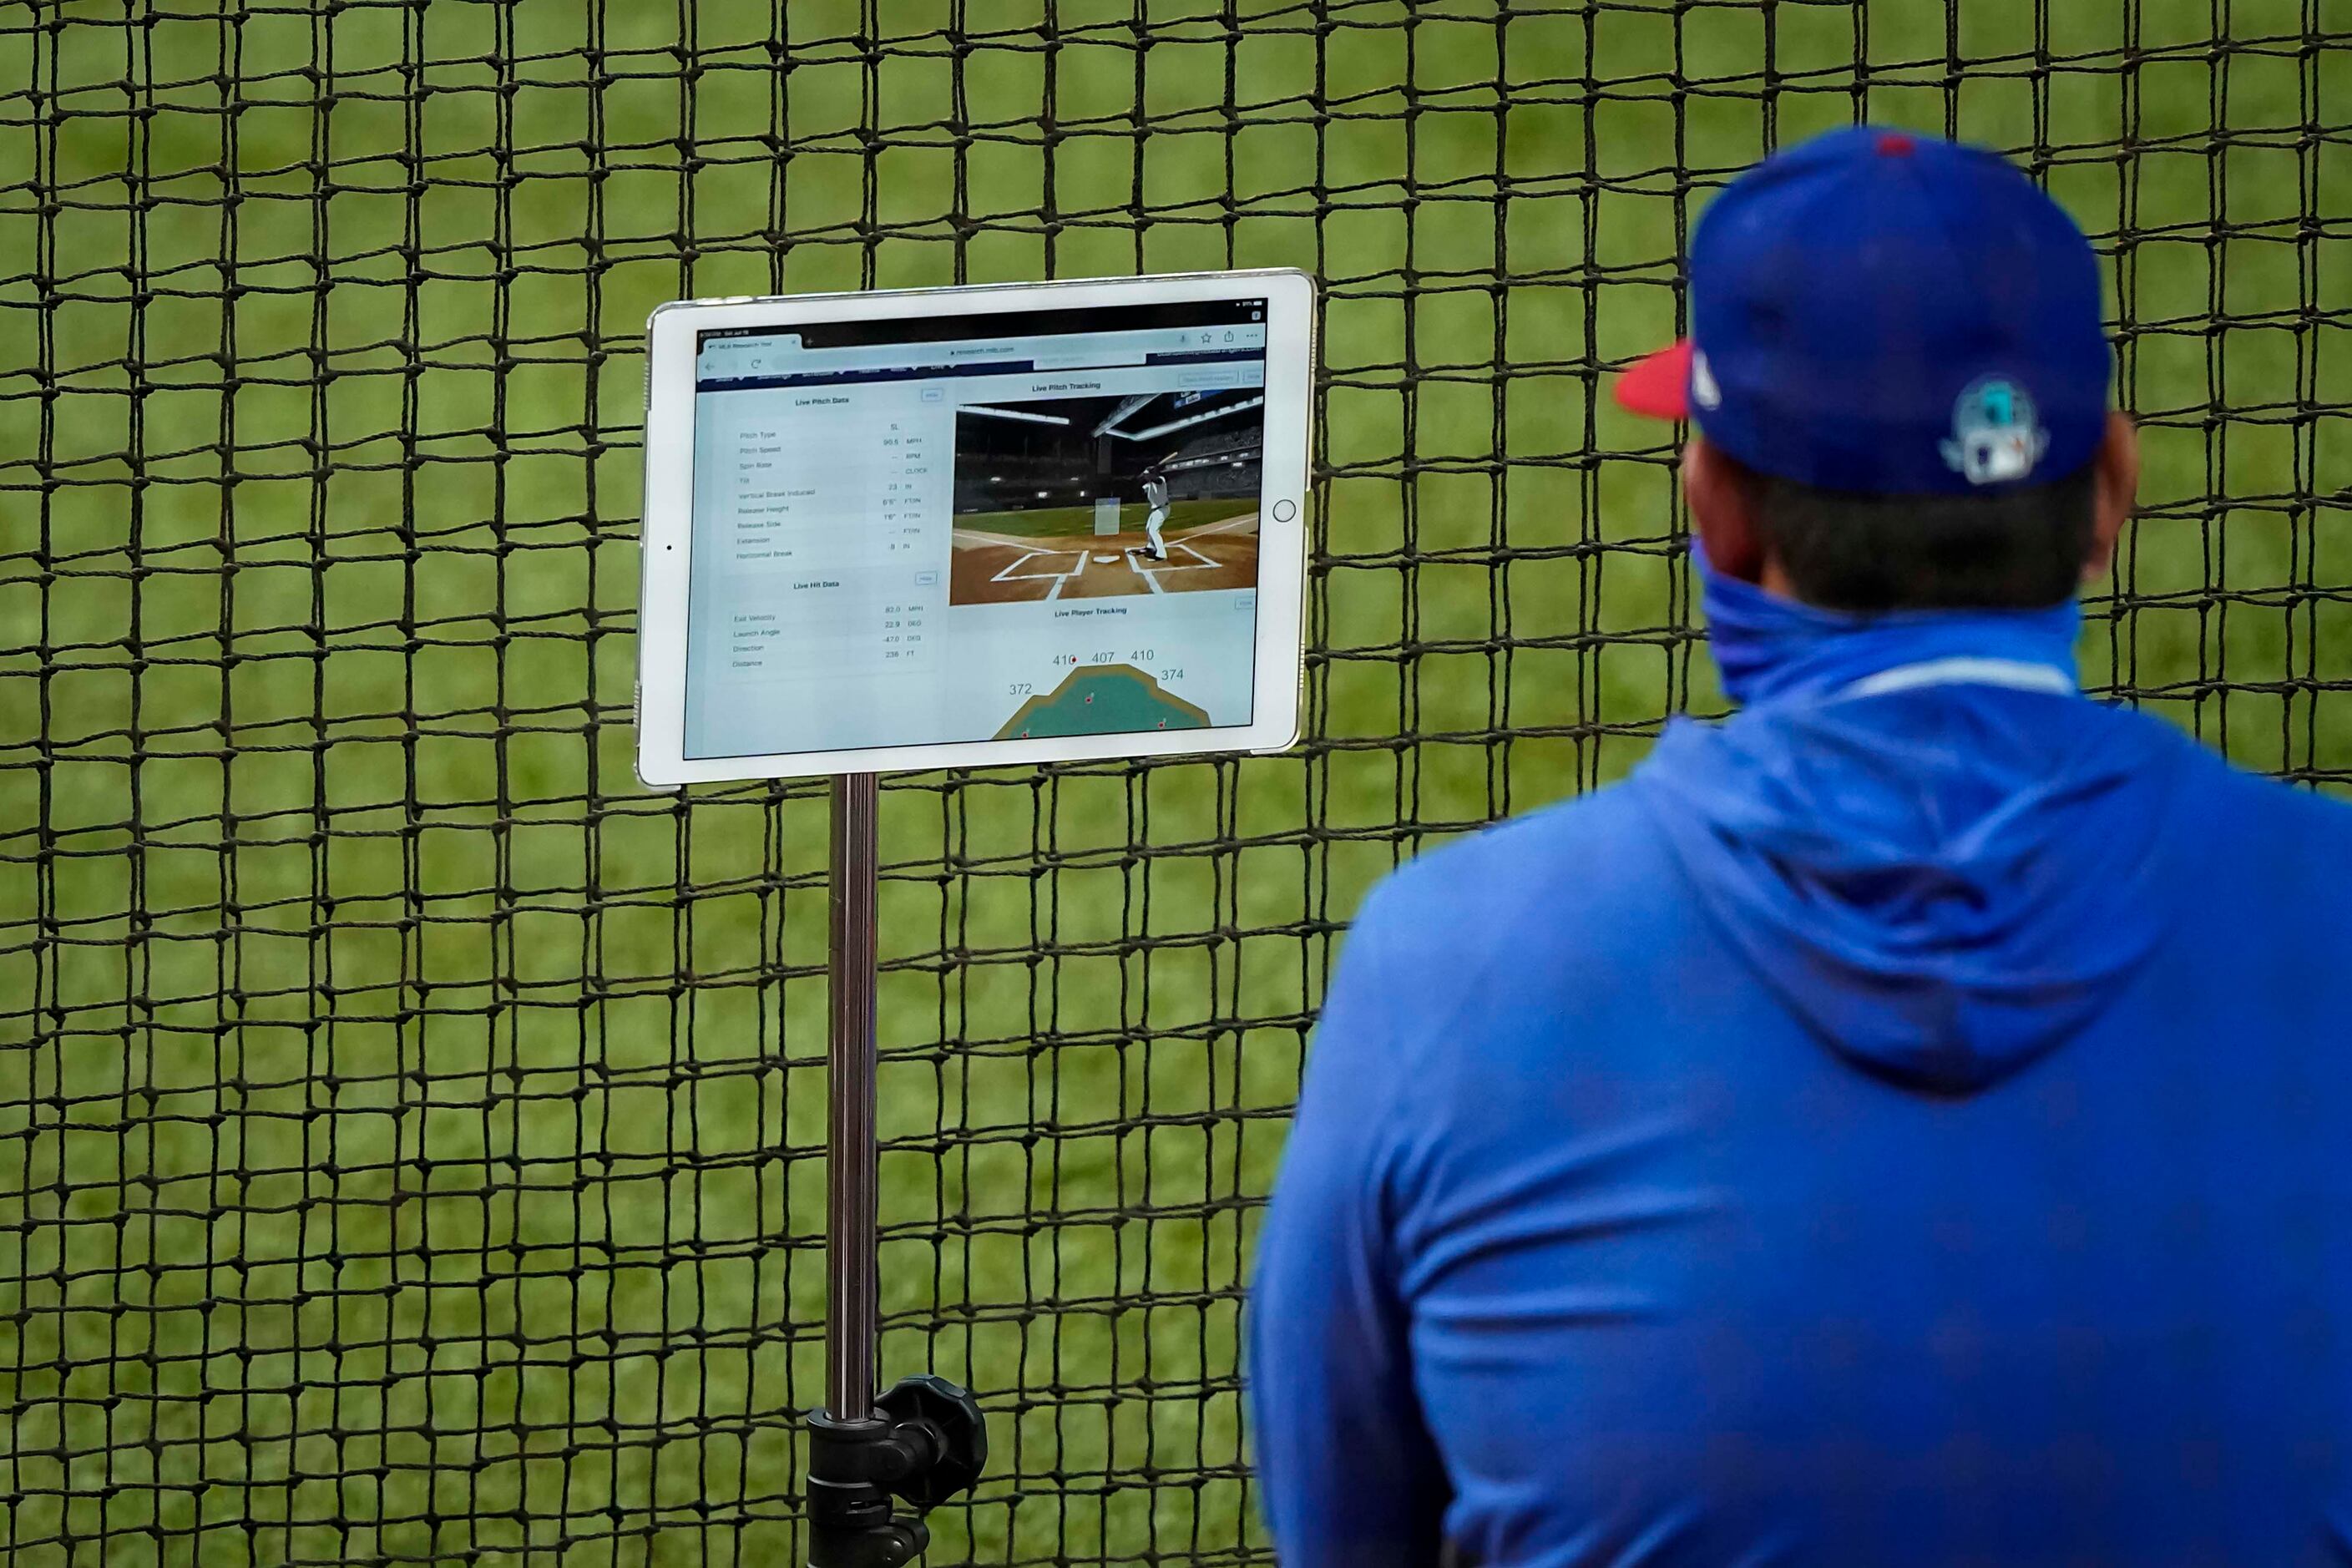 Pitching coach Julio Rangel looks over tracking data on a tablet in an intrasquad game...